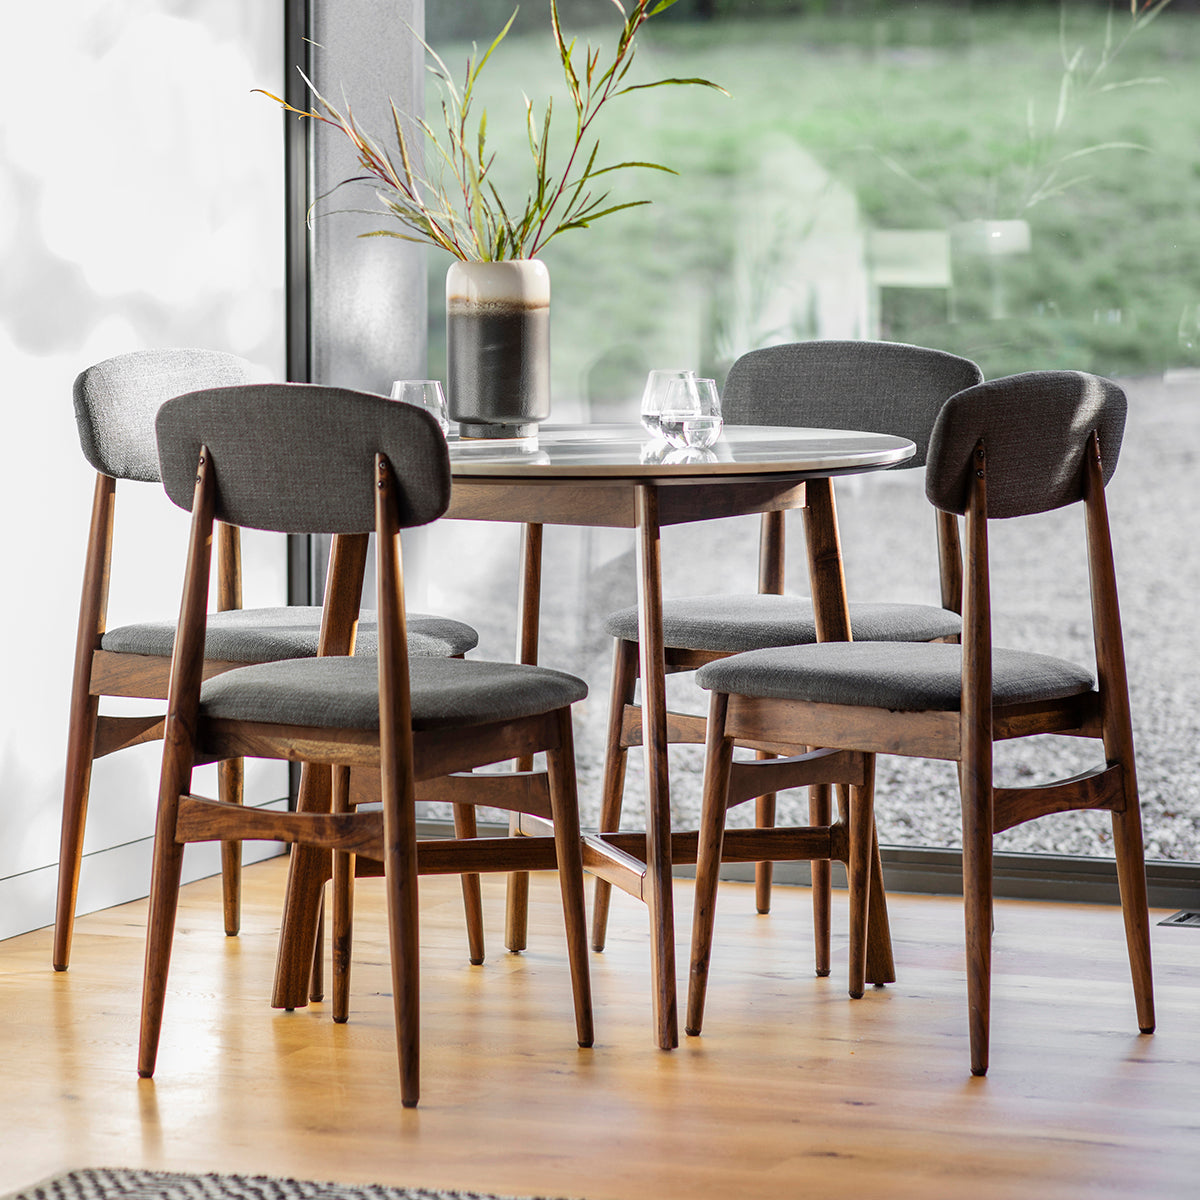 Four Andalusia Dining Chairs around round dining table in the room setting with decor